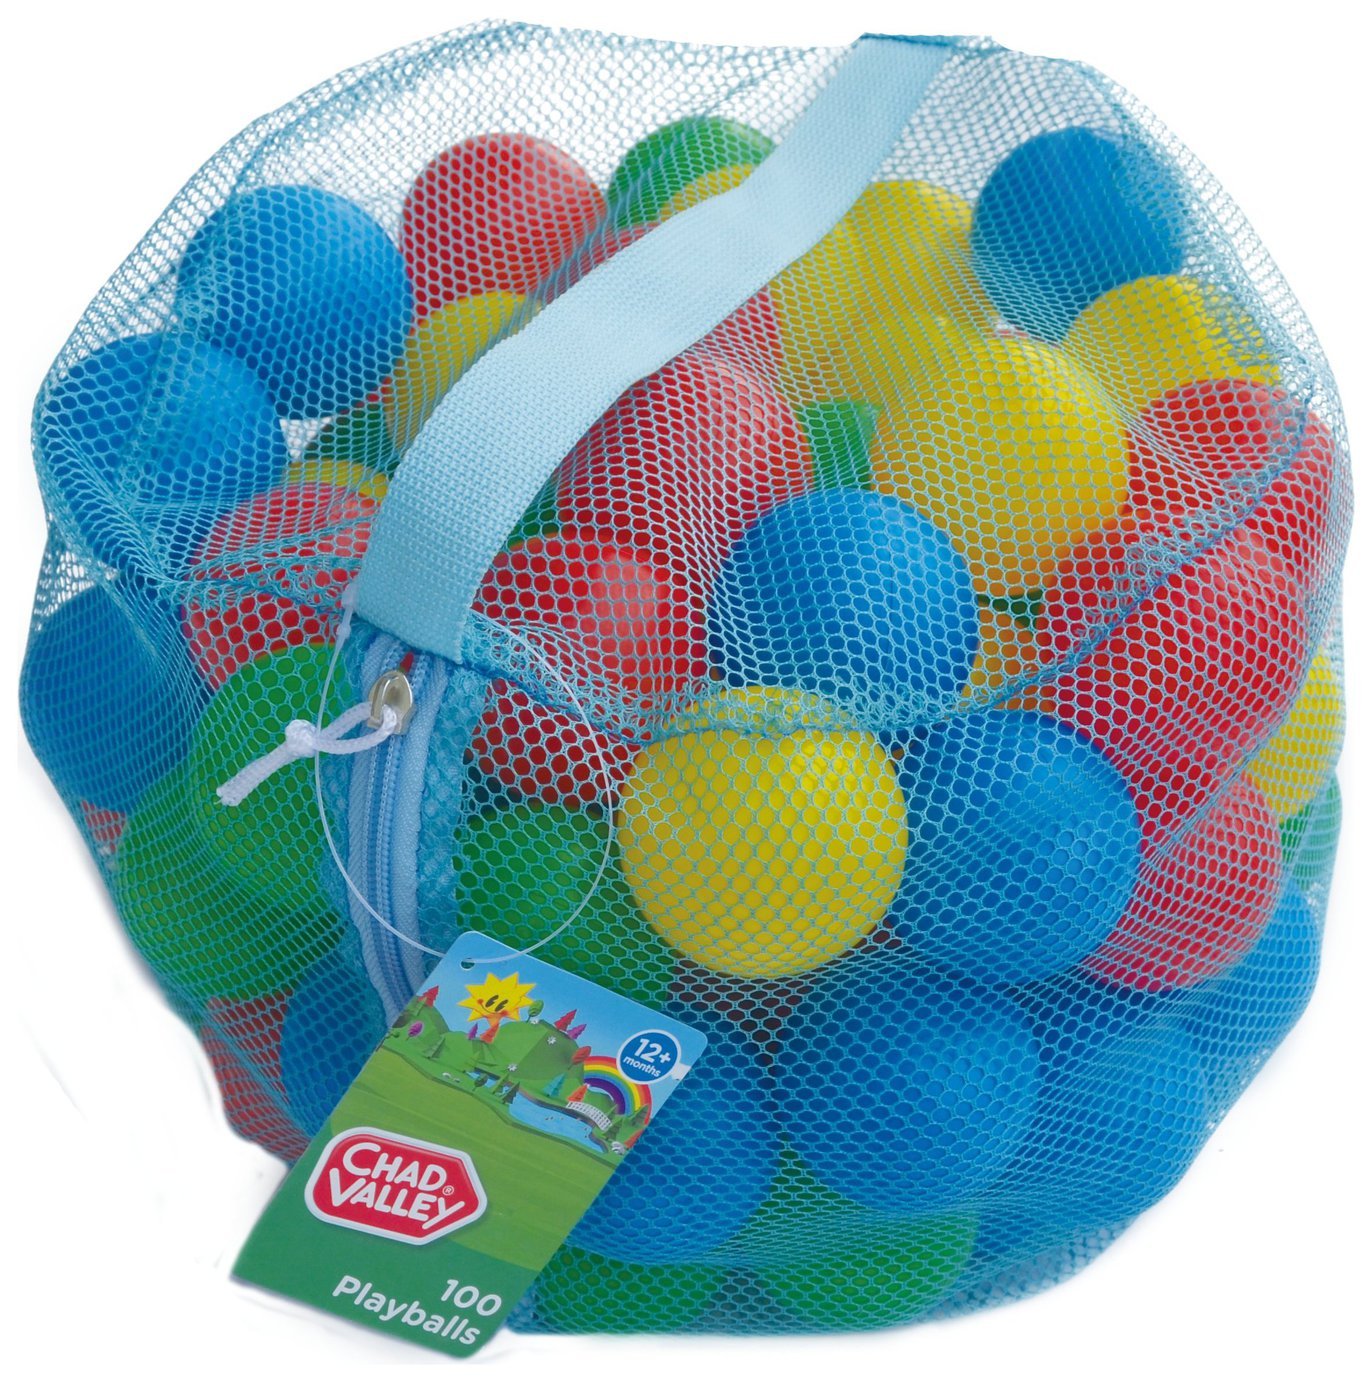 Chad Valley Bag of 100 Multi-Coloured Play Balls review